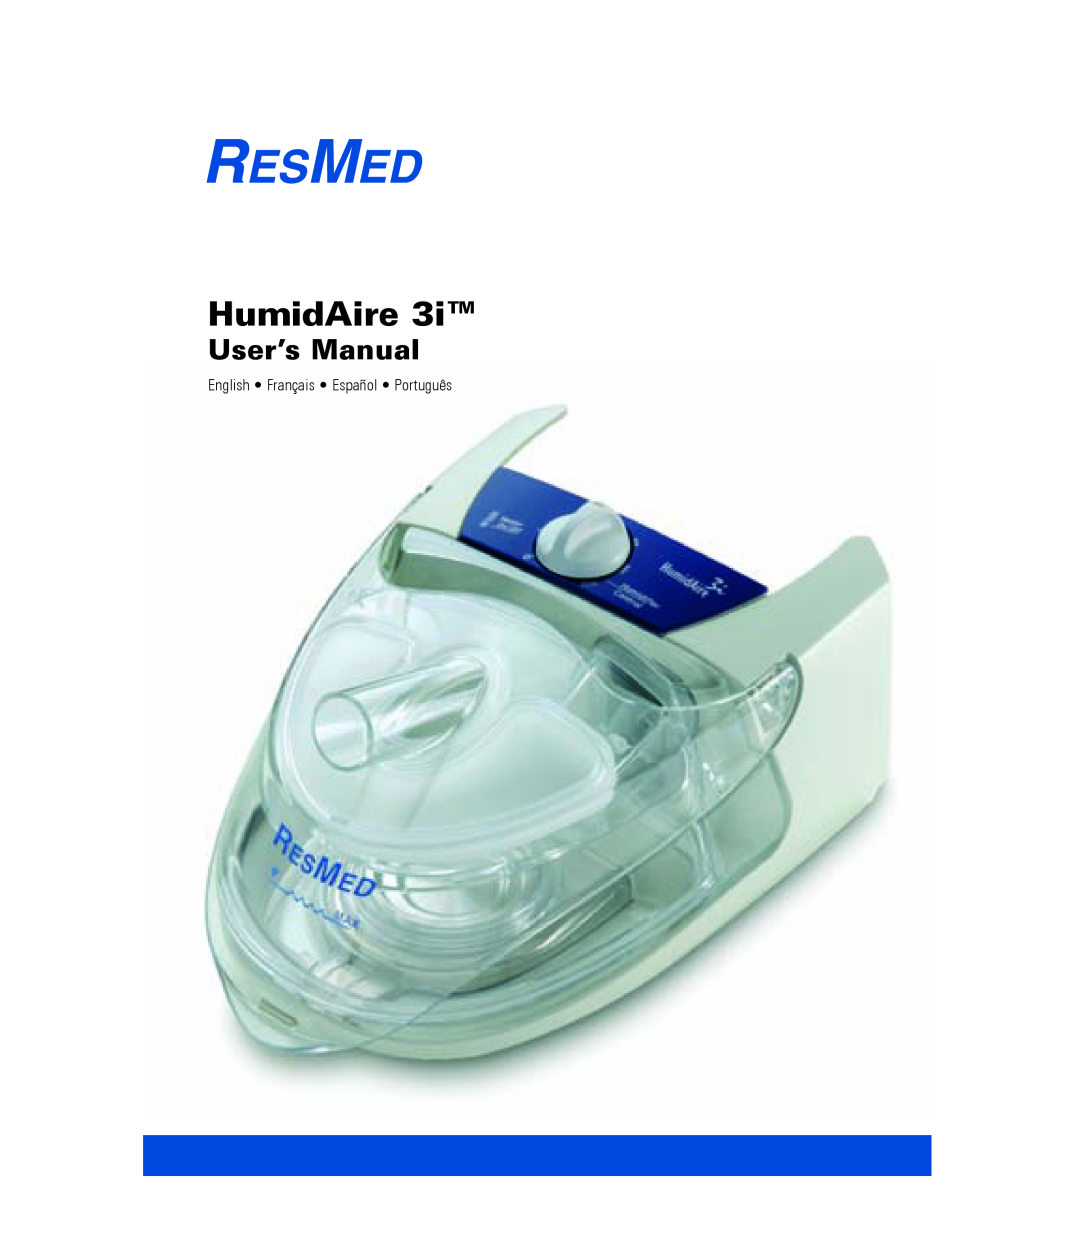 ResMed 3I user manual HumidAire 